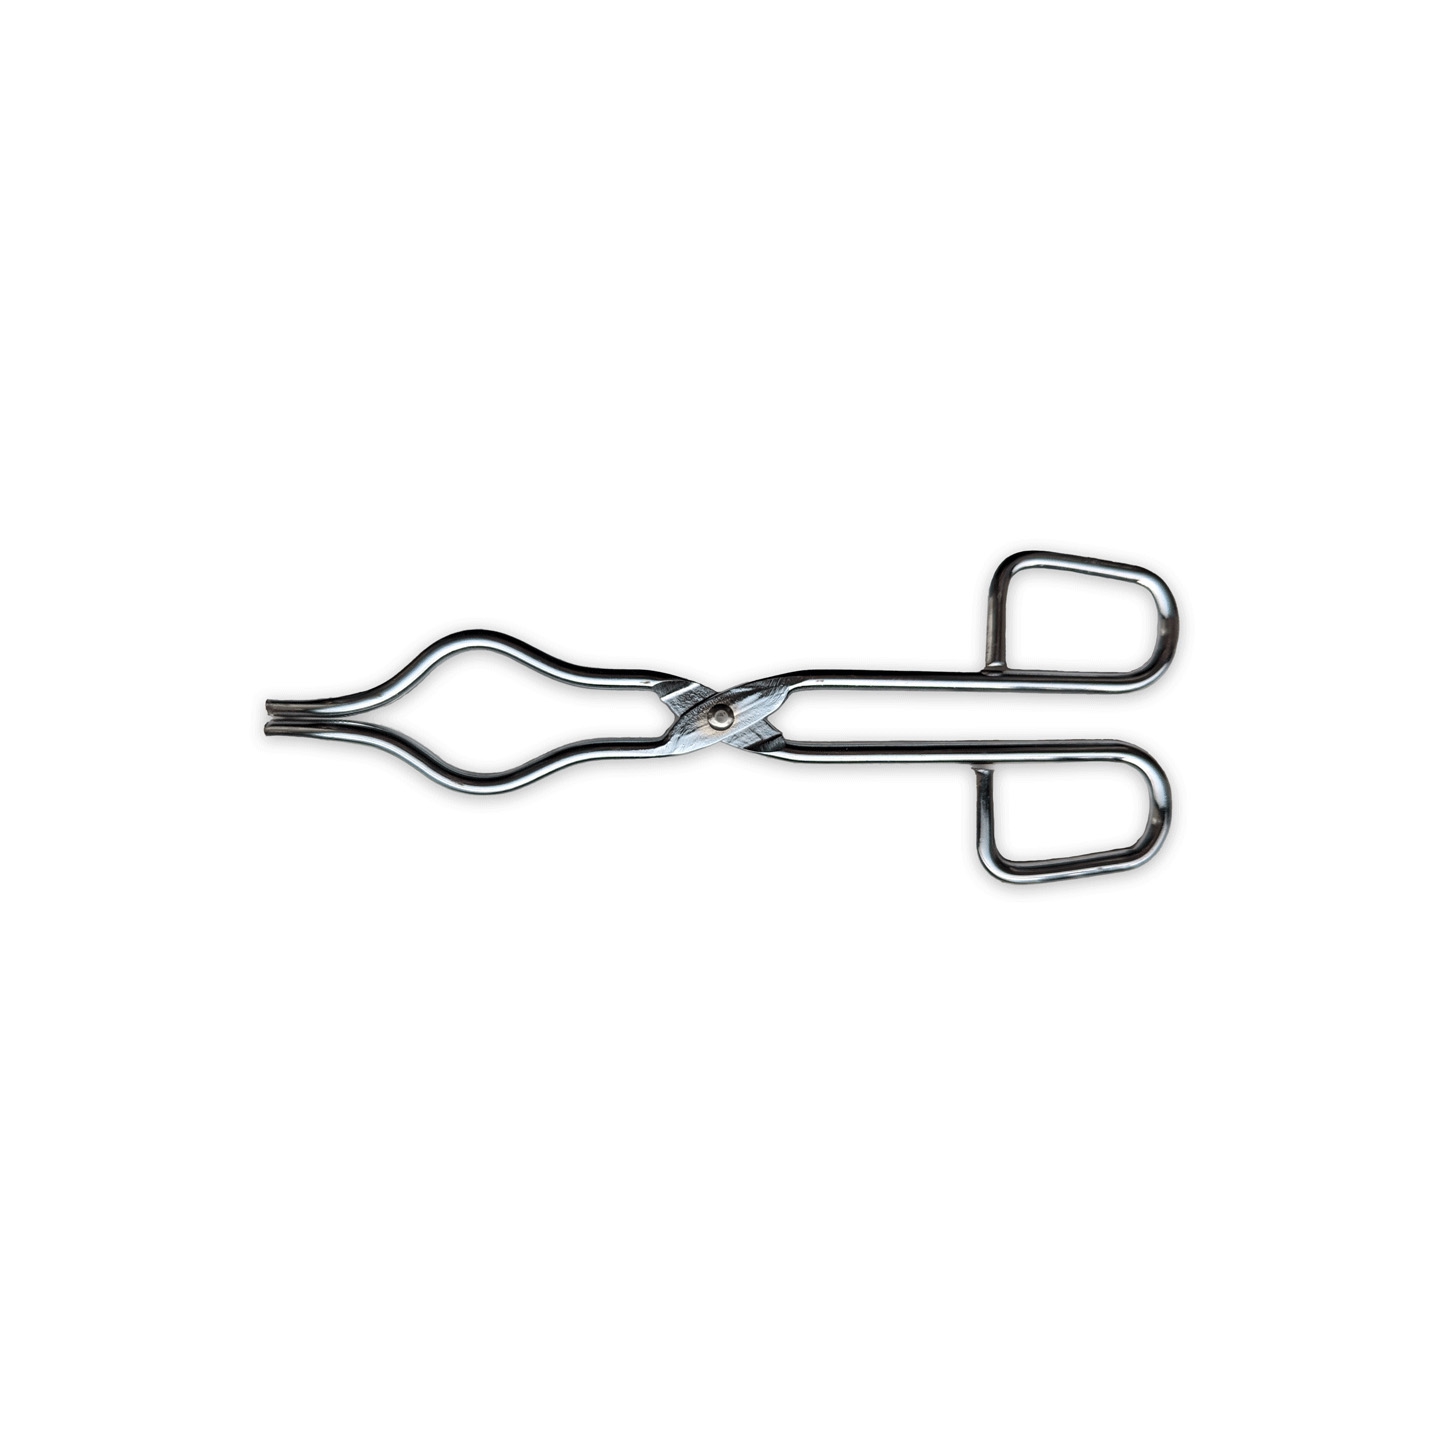 Crucible Tong, Plated Steel, Length 200mm, Bow Curved Tips, Flat Hinge